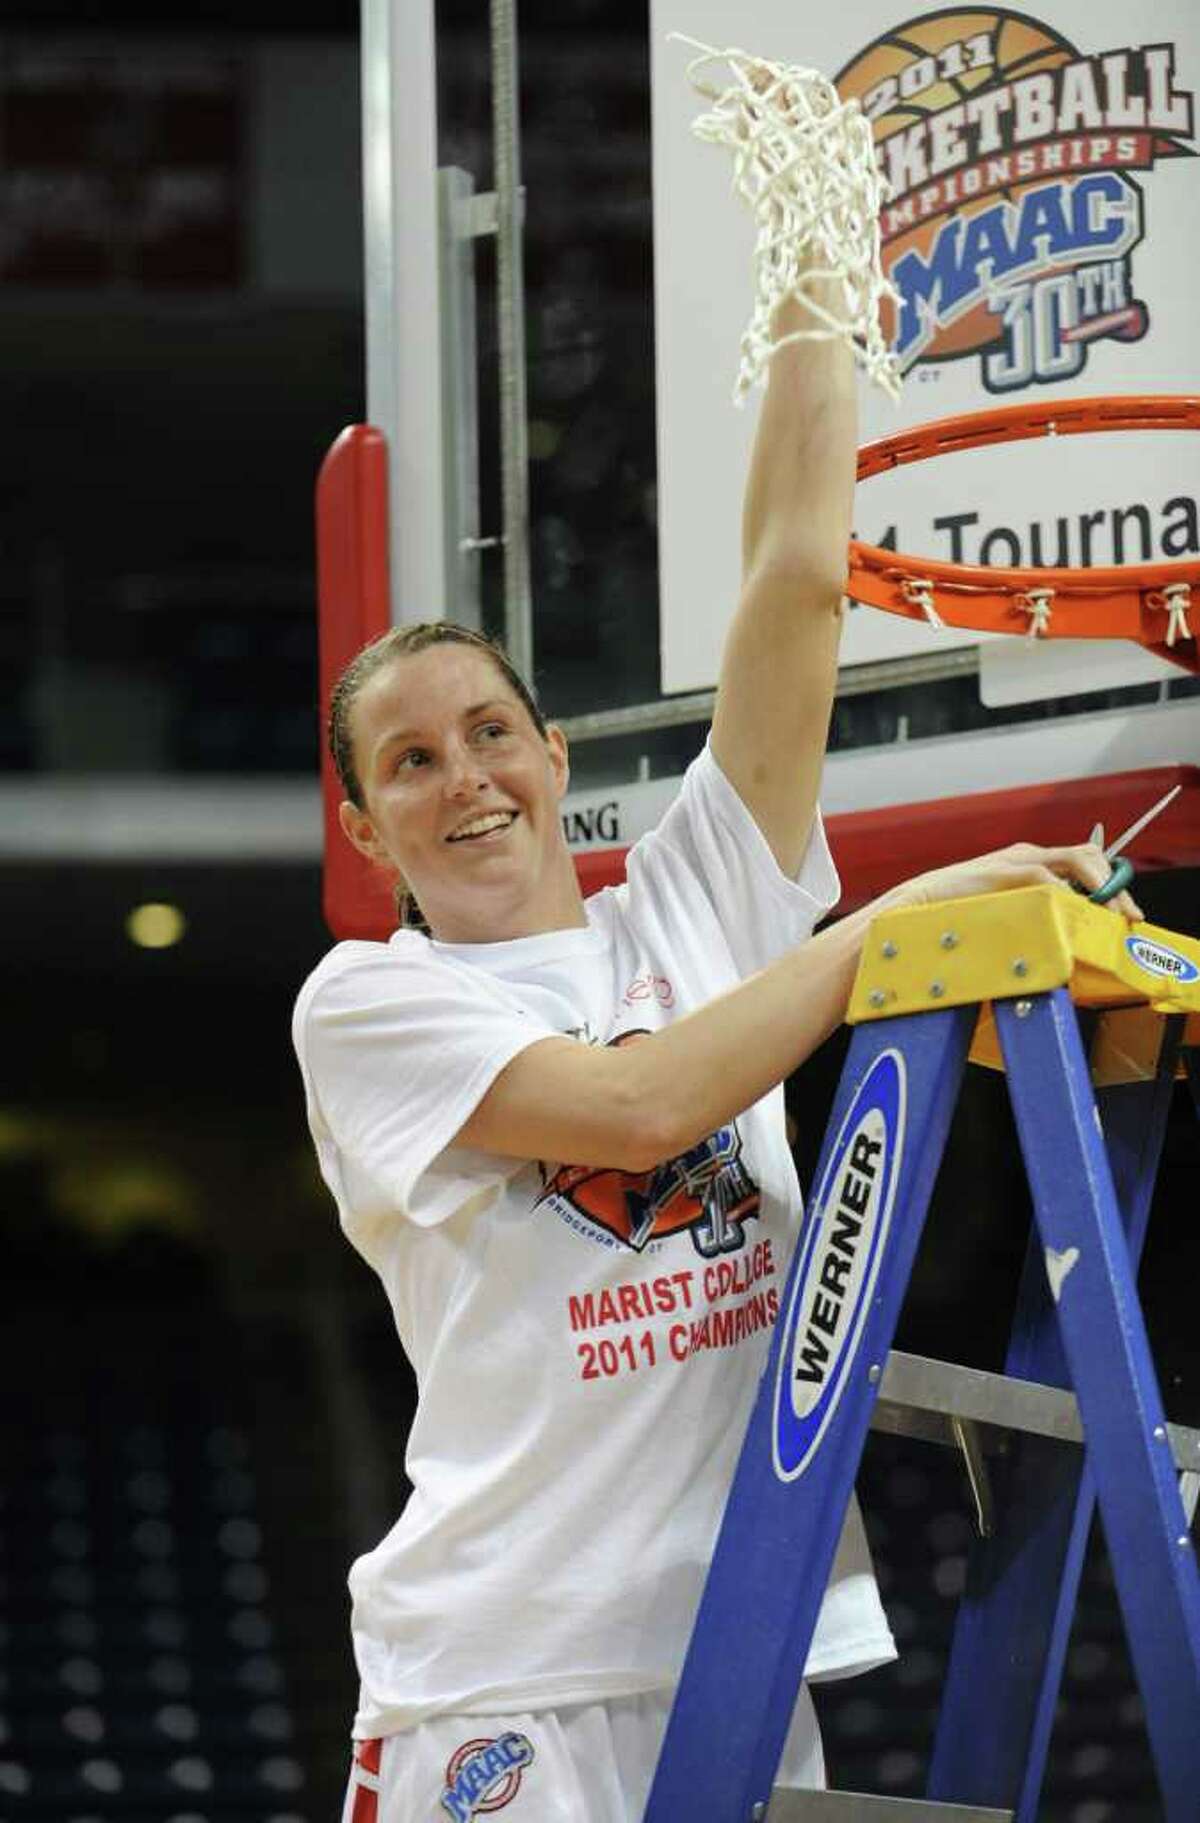 MAAC conference tournament women's basketball finals at the Webster Bank Arena at Harbor Yard in Bridgeport on Monday, March 7, 2011. Marist defeated Loyola 63-45.